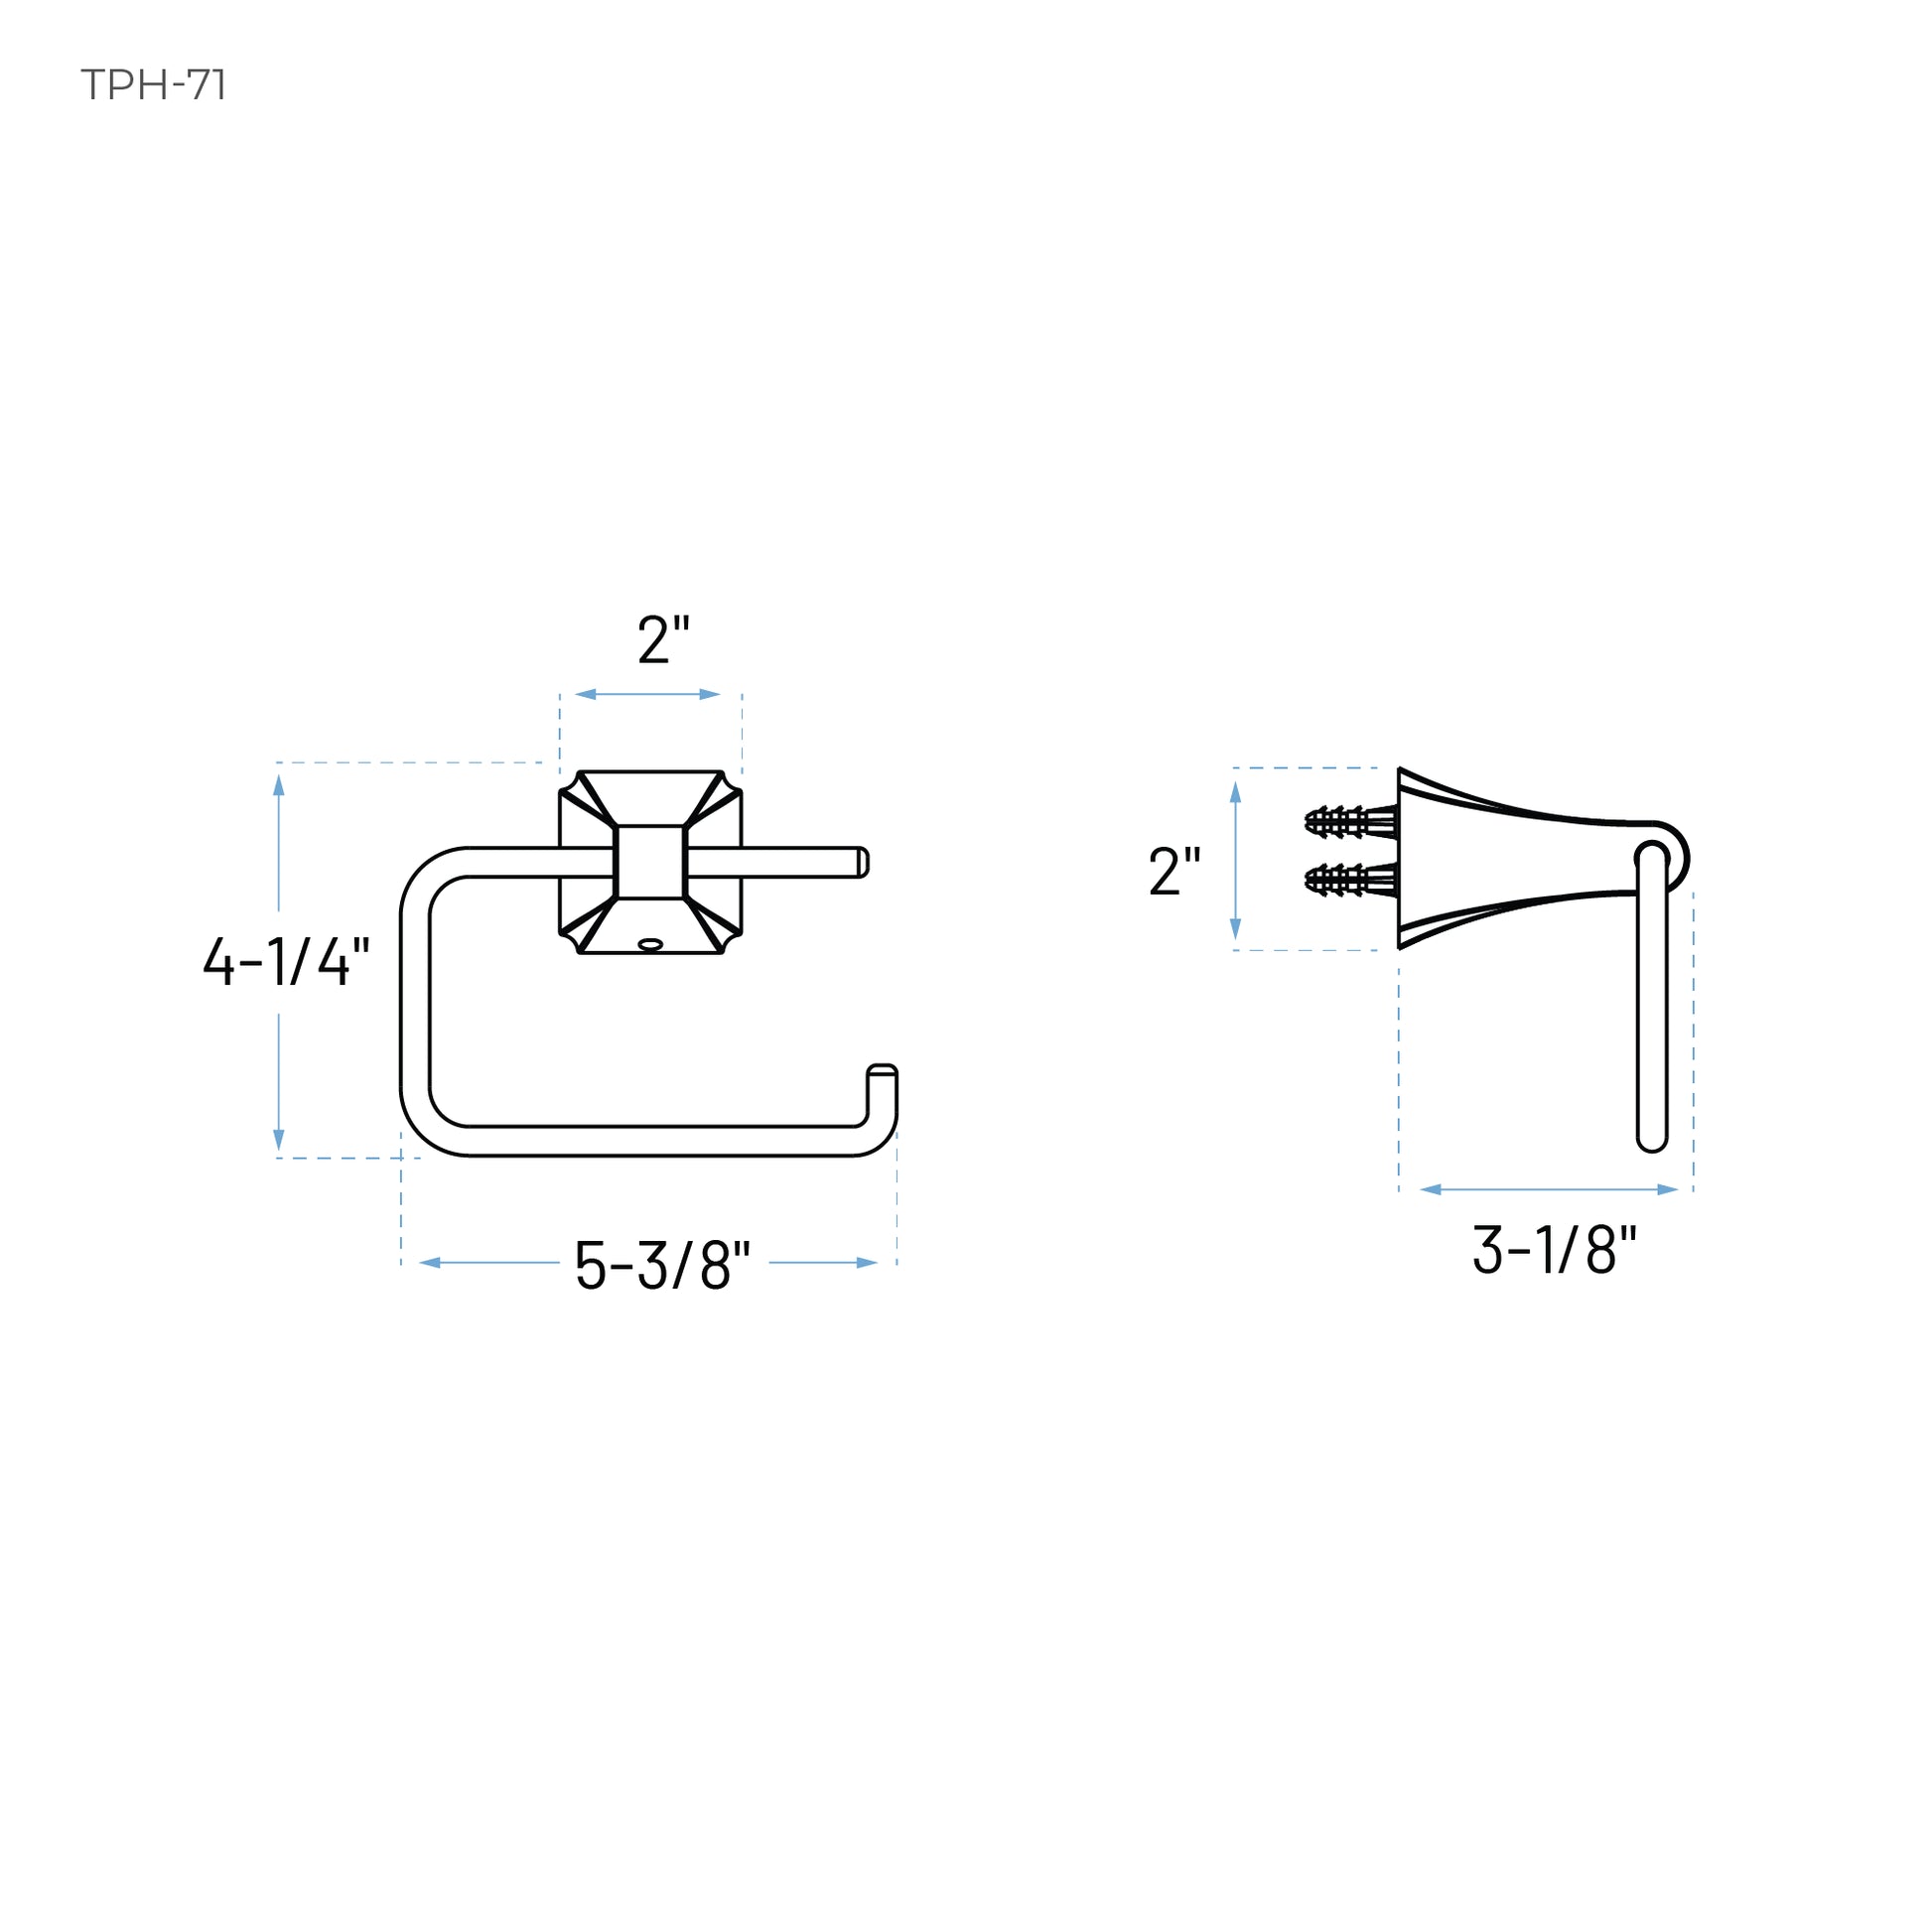 Technical Drawing of a Toilet Paper Holder